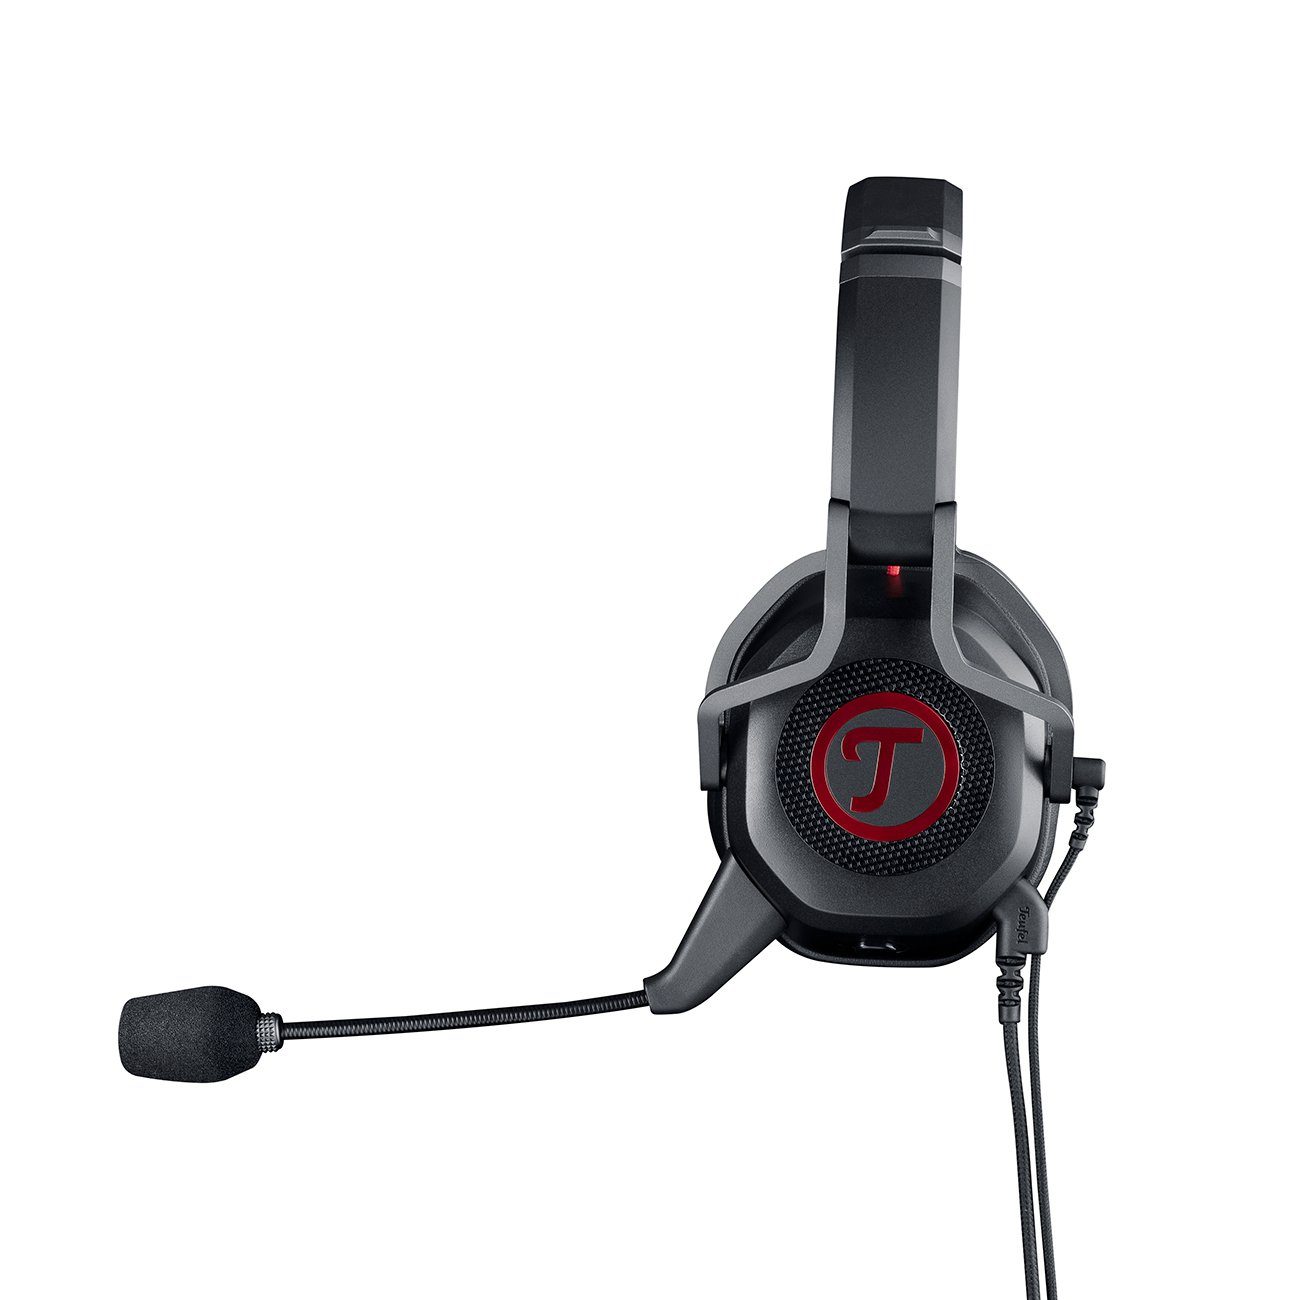 (mit Gaming-Headset USB-Soundkarte) integrierter CAGE Teufel